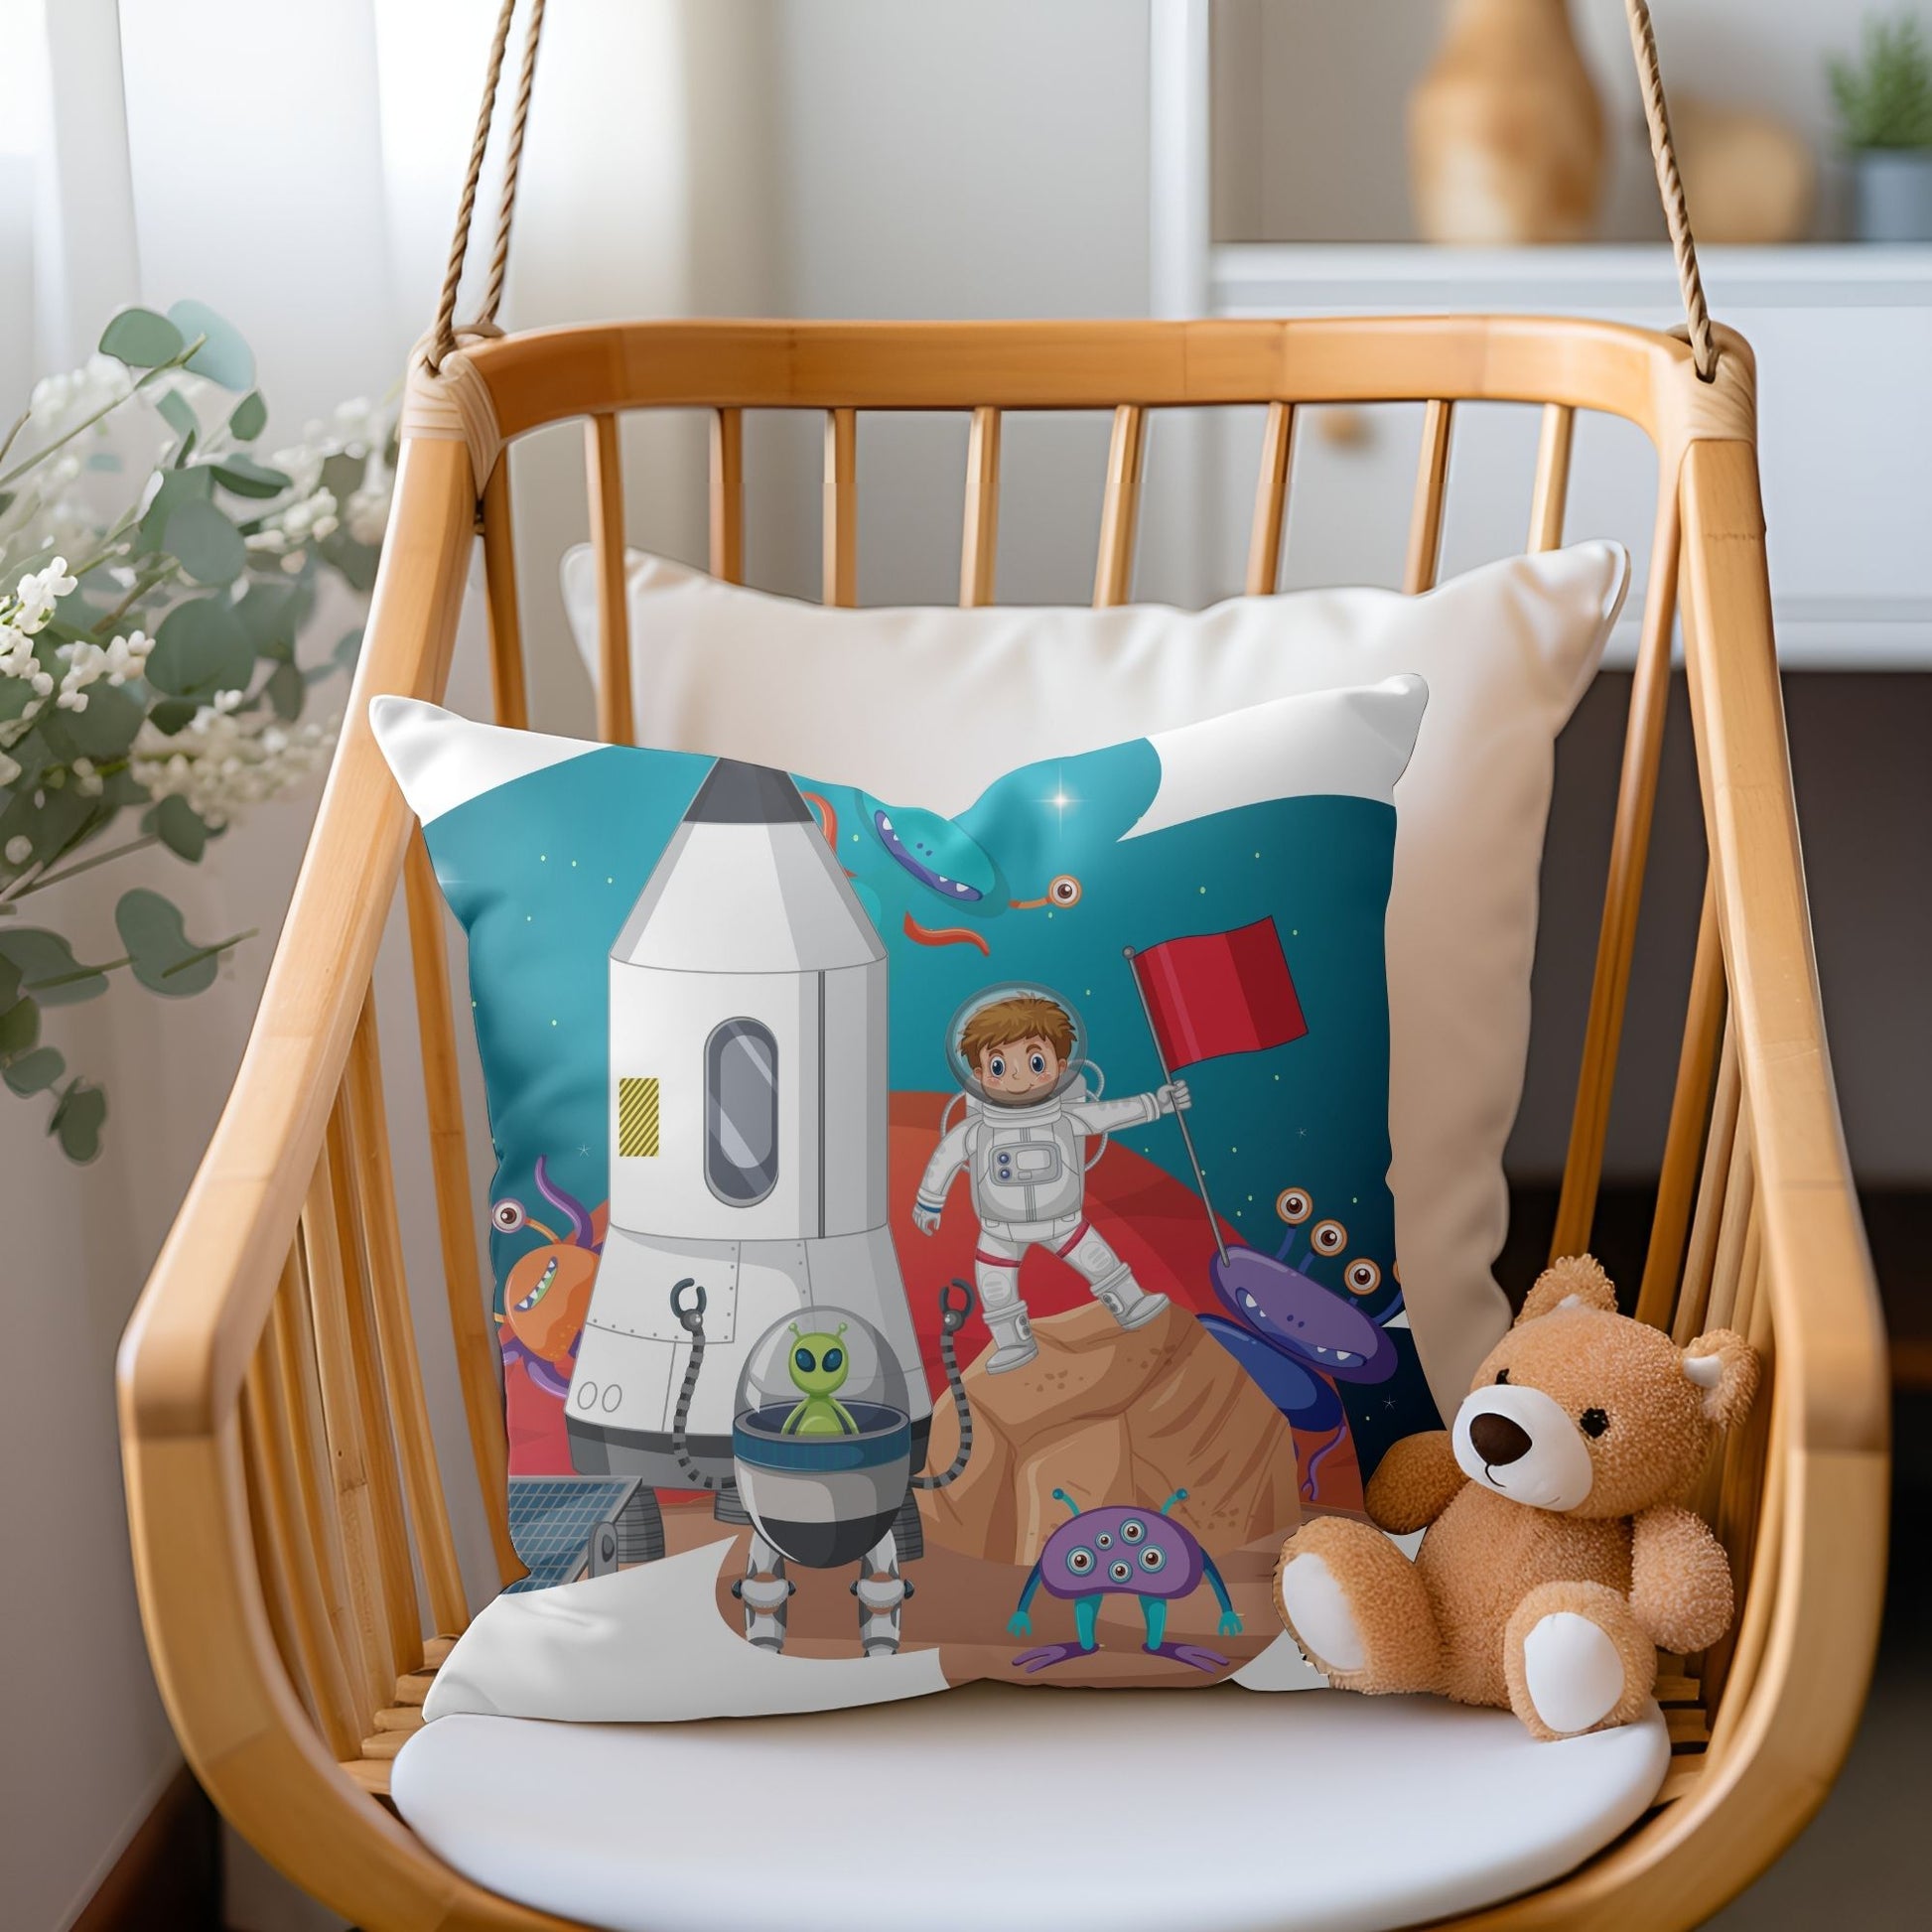 Imaginative kids pillow featuring a little boy's space mission for dreamy nights.